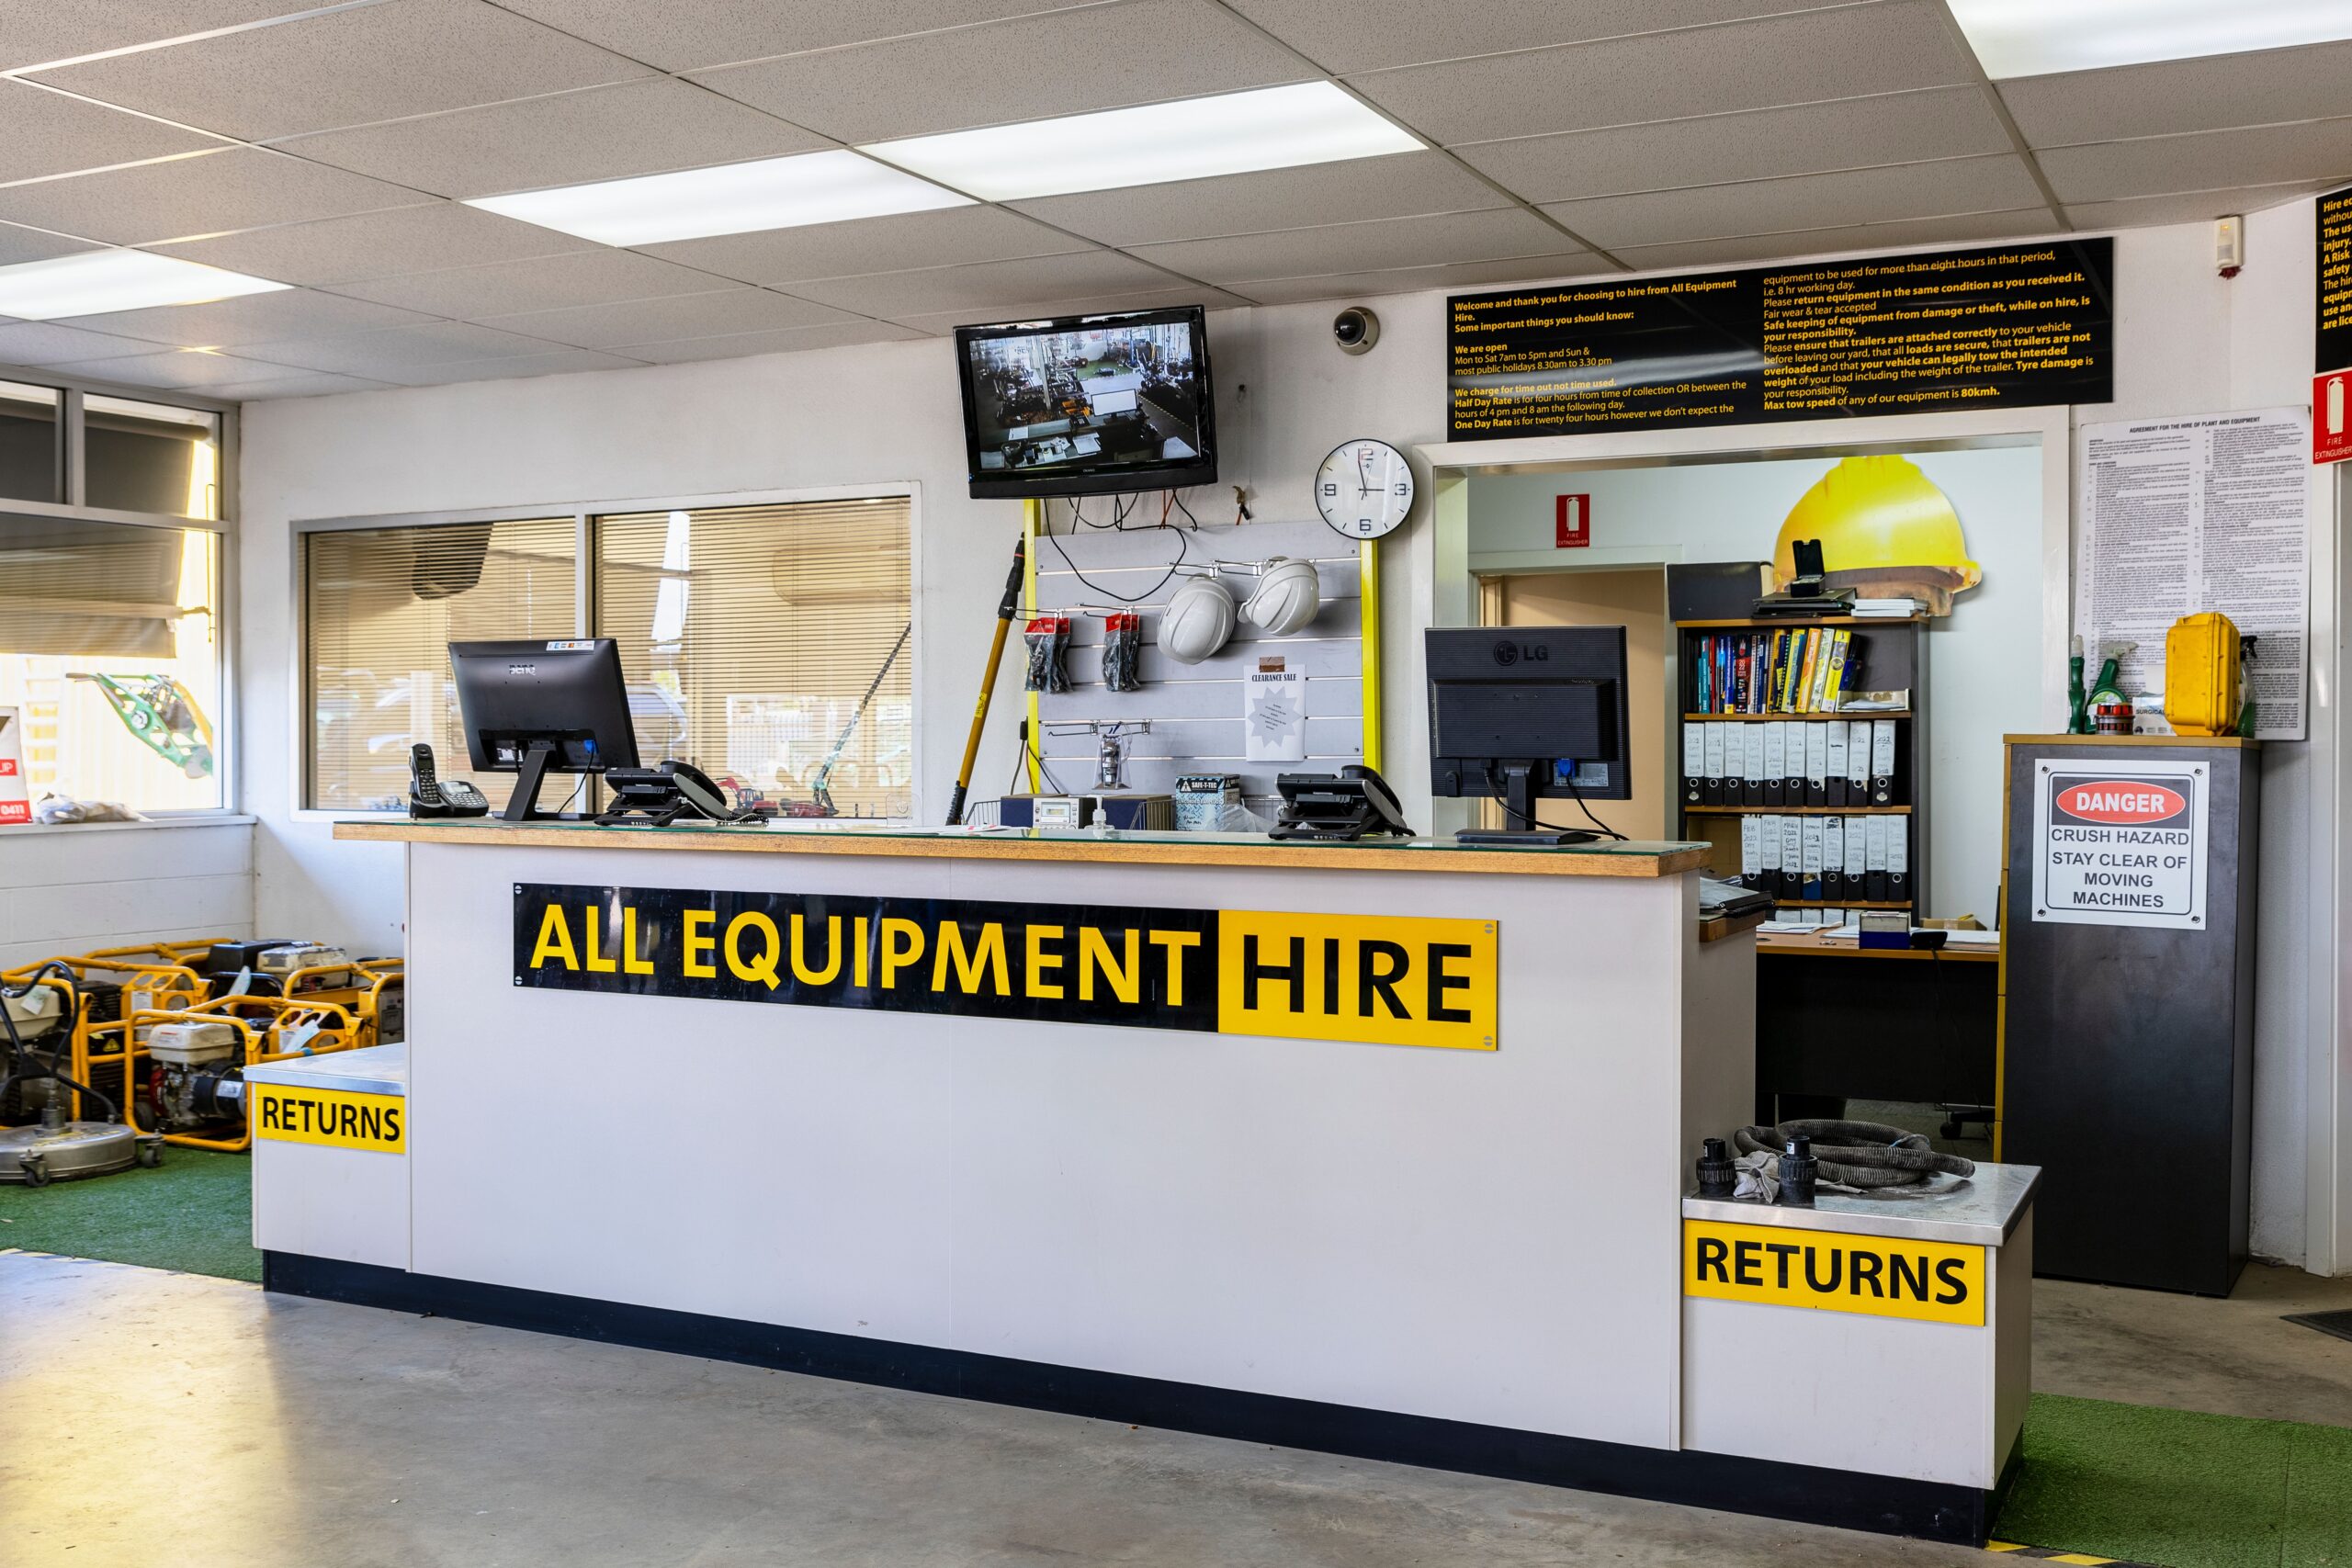 The Top 5 Reasons to Hire Equipment Rather Than Buy It